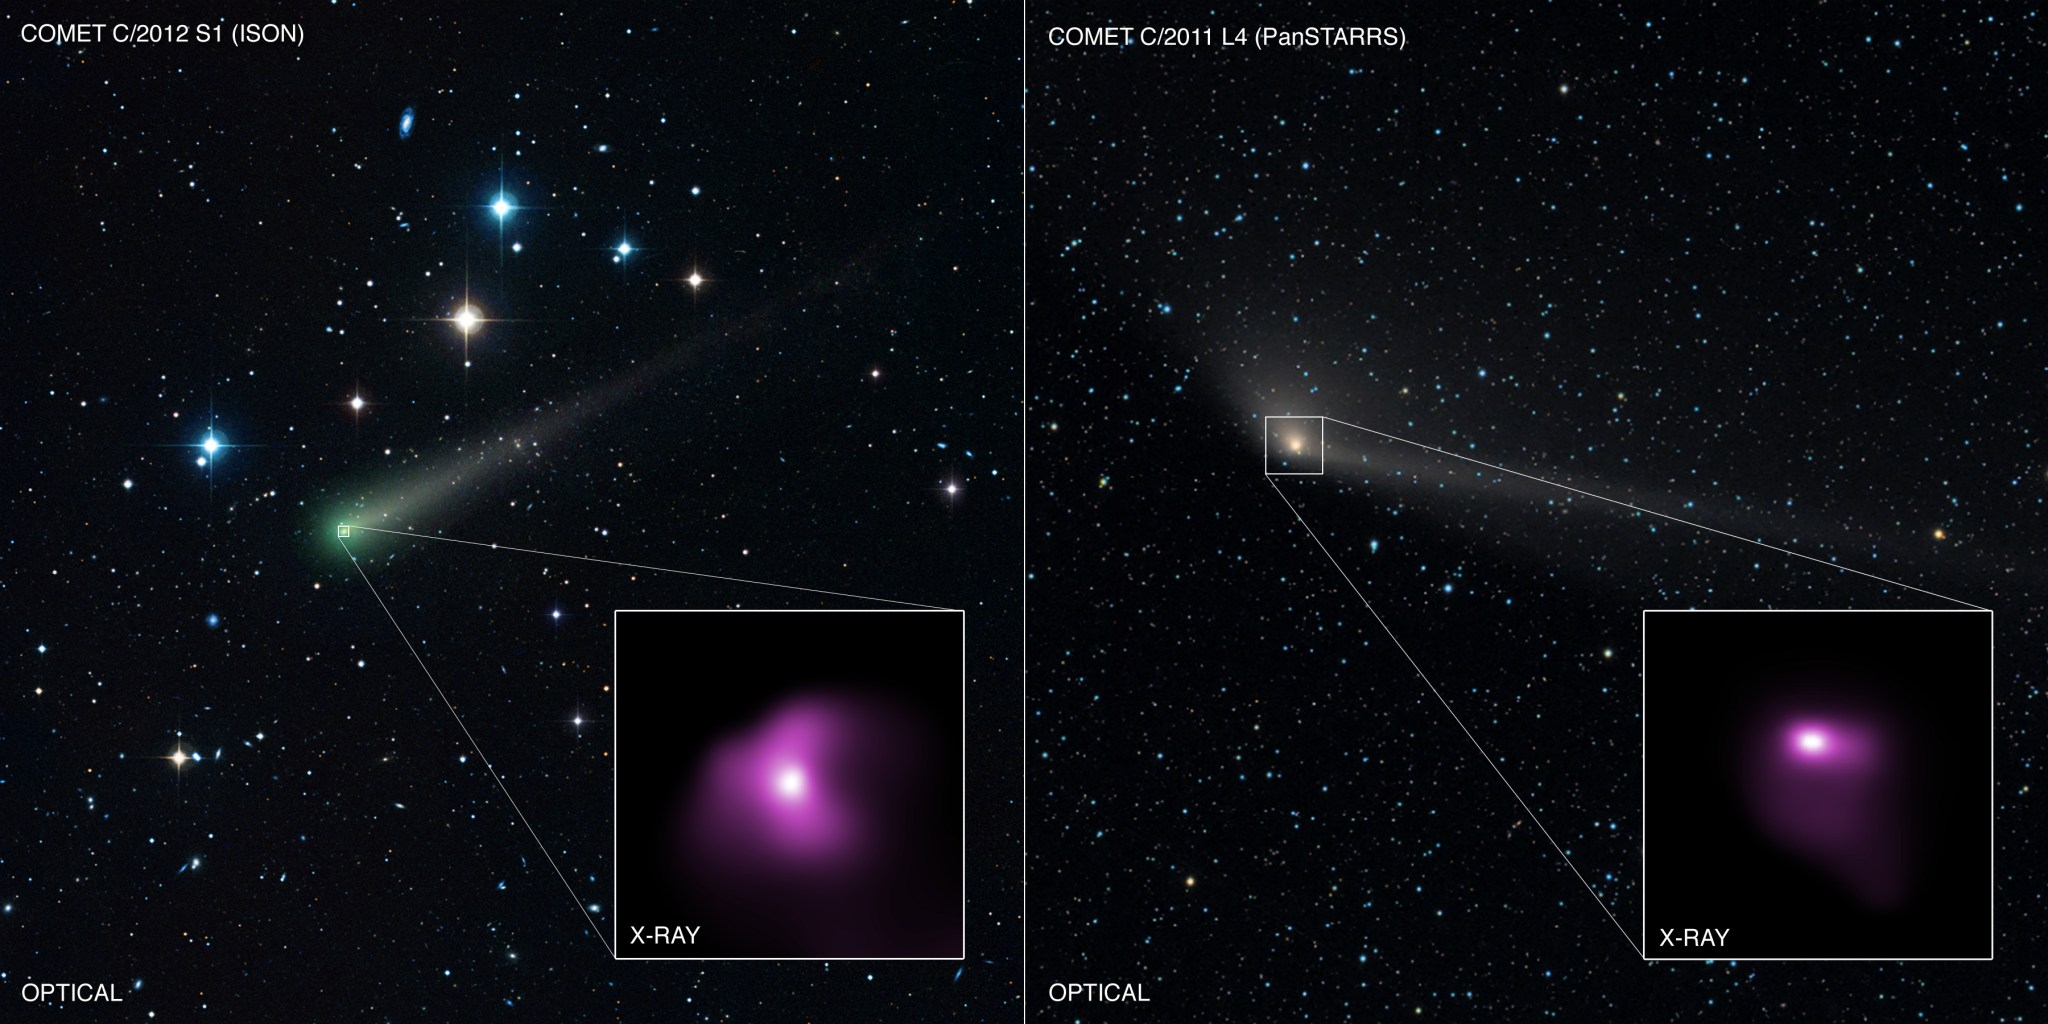 Astronomers used Chandra to observe Comet ISON and Comet PanSTARRS in 2013, when these were relatively close to the Earth.